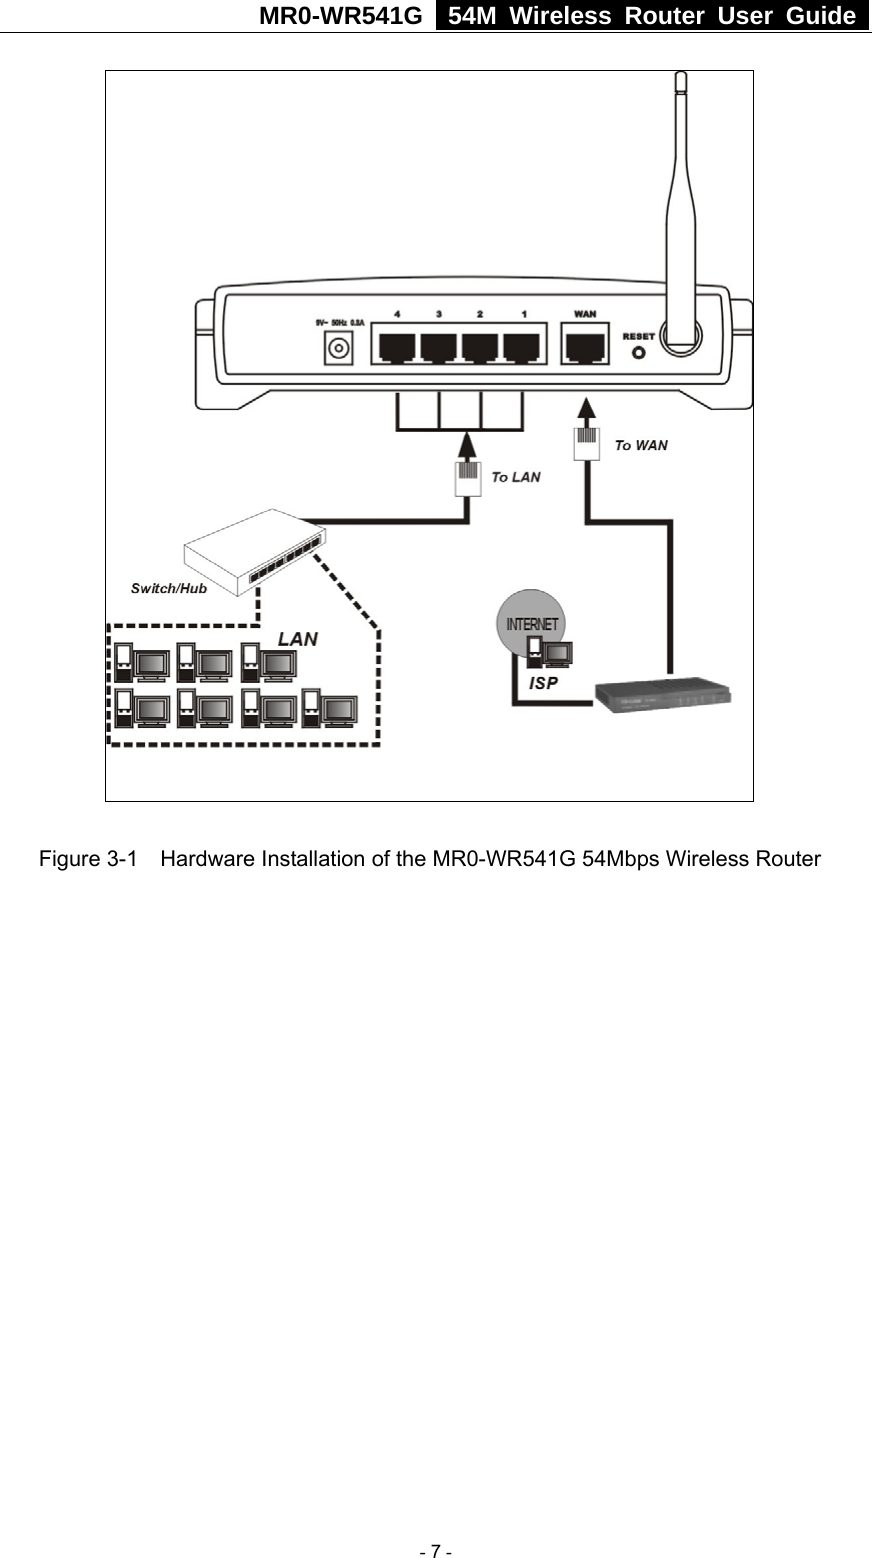 MR0-WR541G   54M Wireless Router User Guide    Figure 3-1    Hardware Installation of the MR0-WR541G 54Mbps Wireless Router  - 7 - 